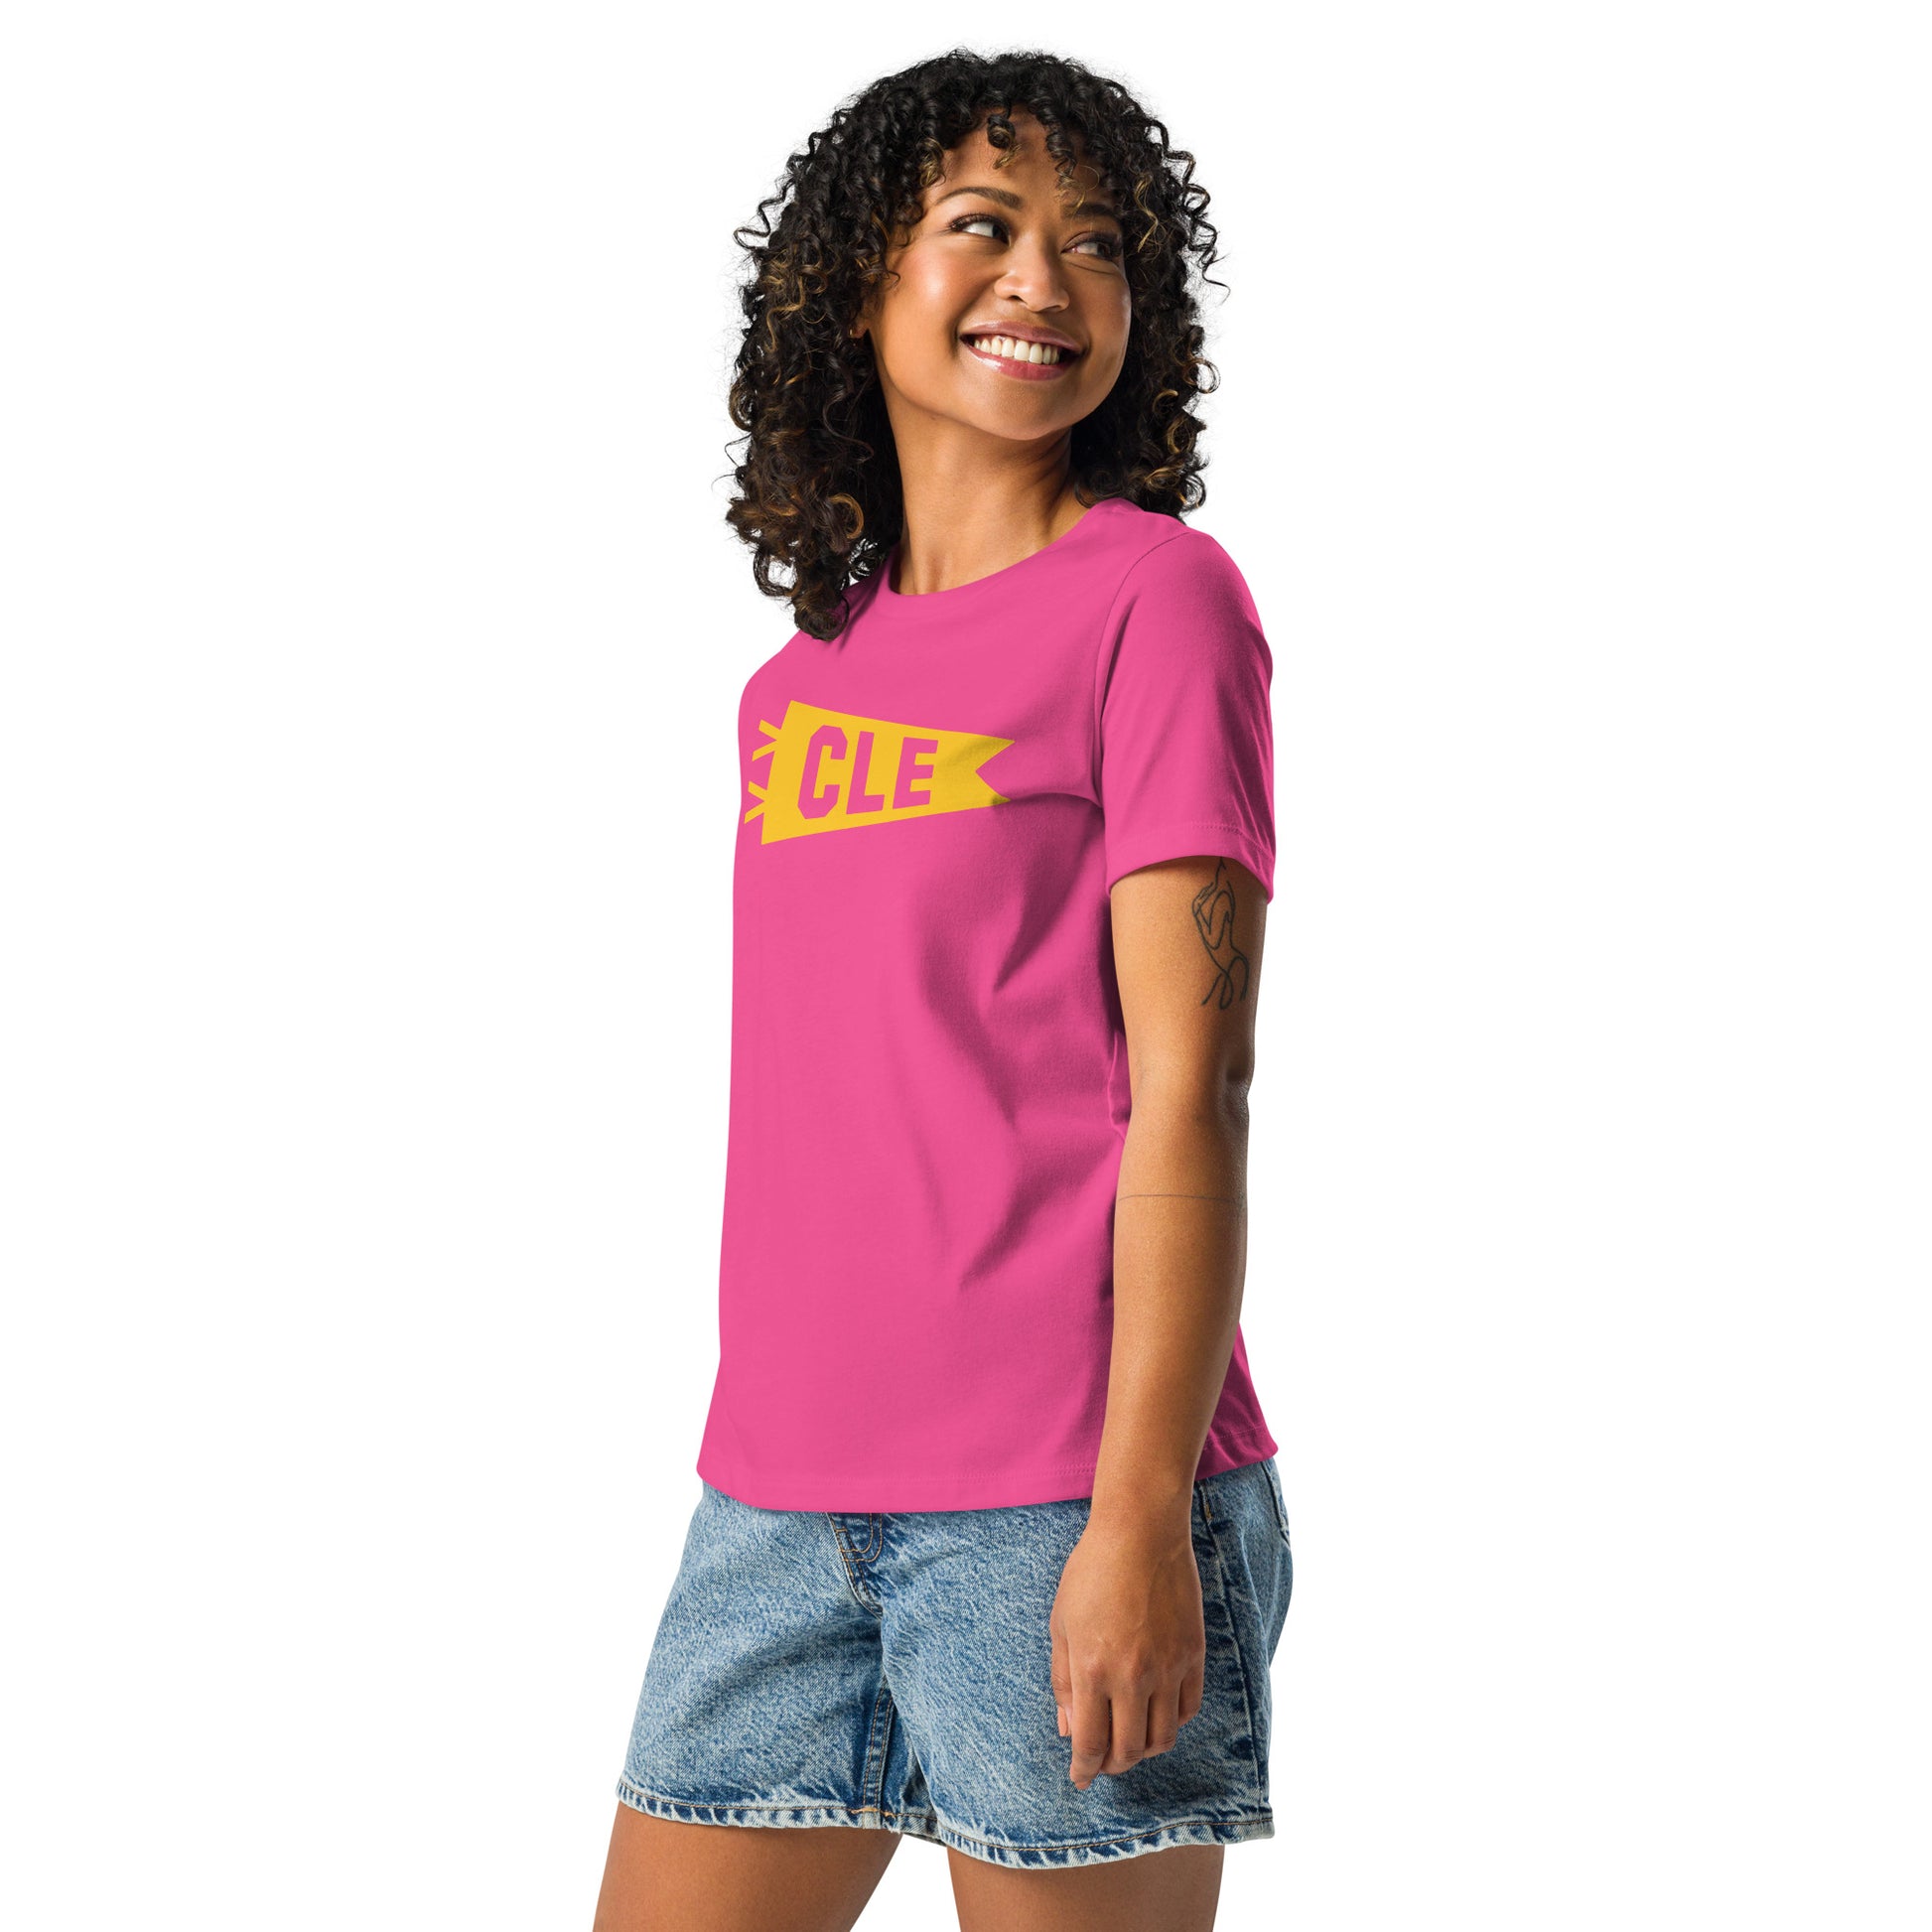 Airport Code Women's Tee - Yellow Graphic • CLE Cleveland • YHM Designs - Image 06